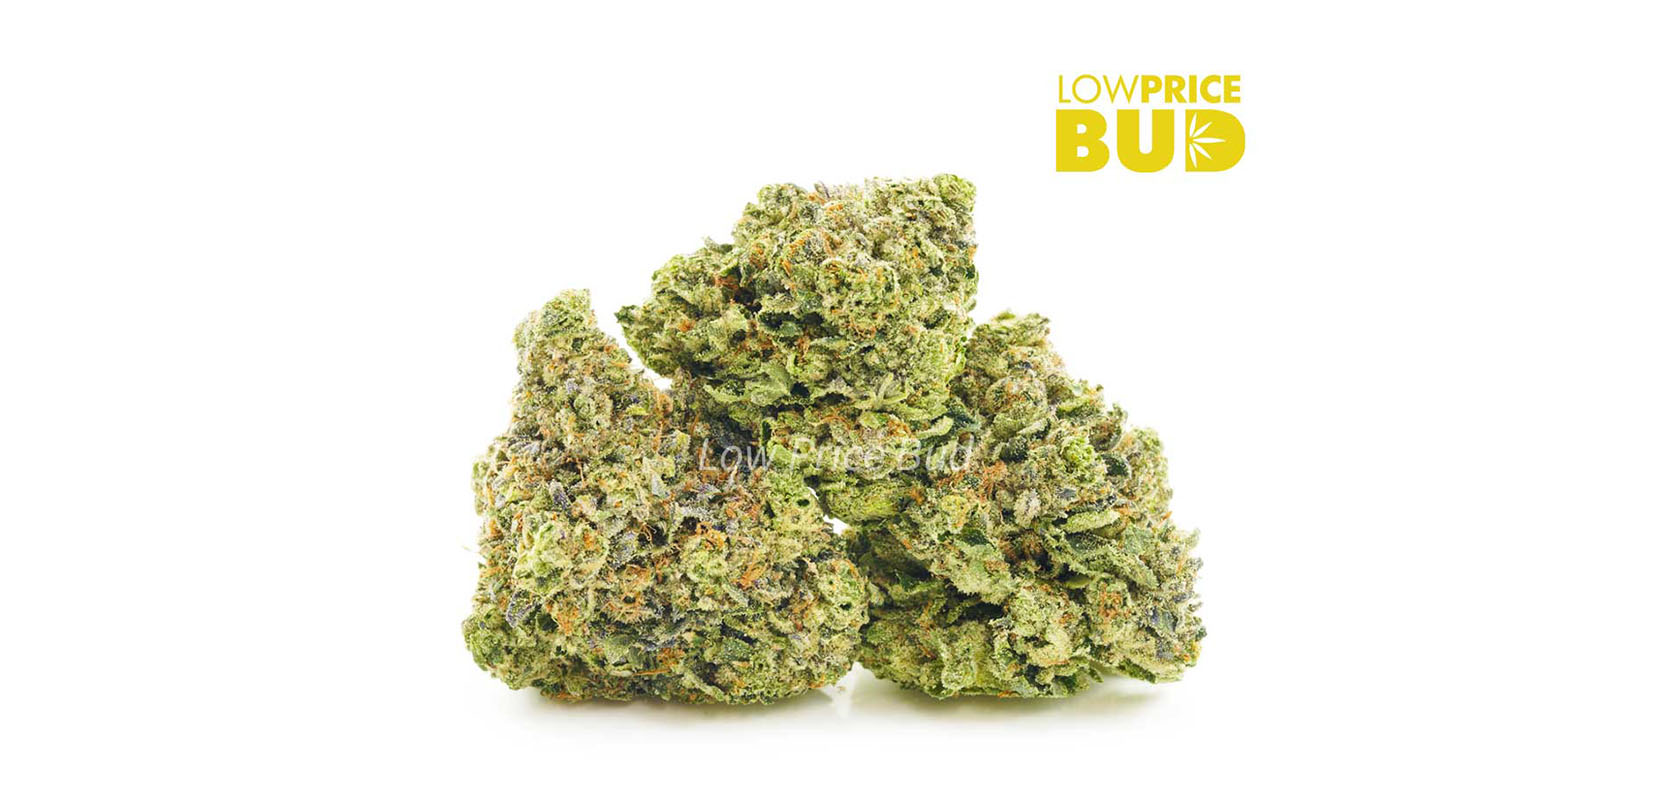 AAAA Death Bubba Hybrid weed for sale from low price bud online dispensary in BC. buy weed online.